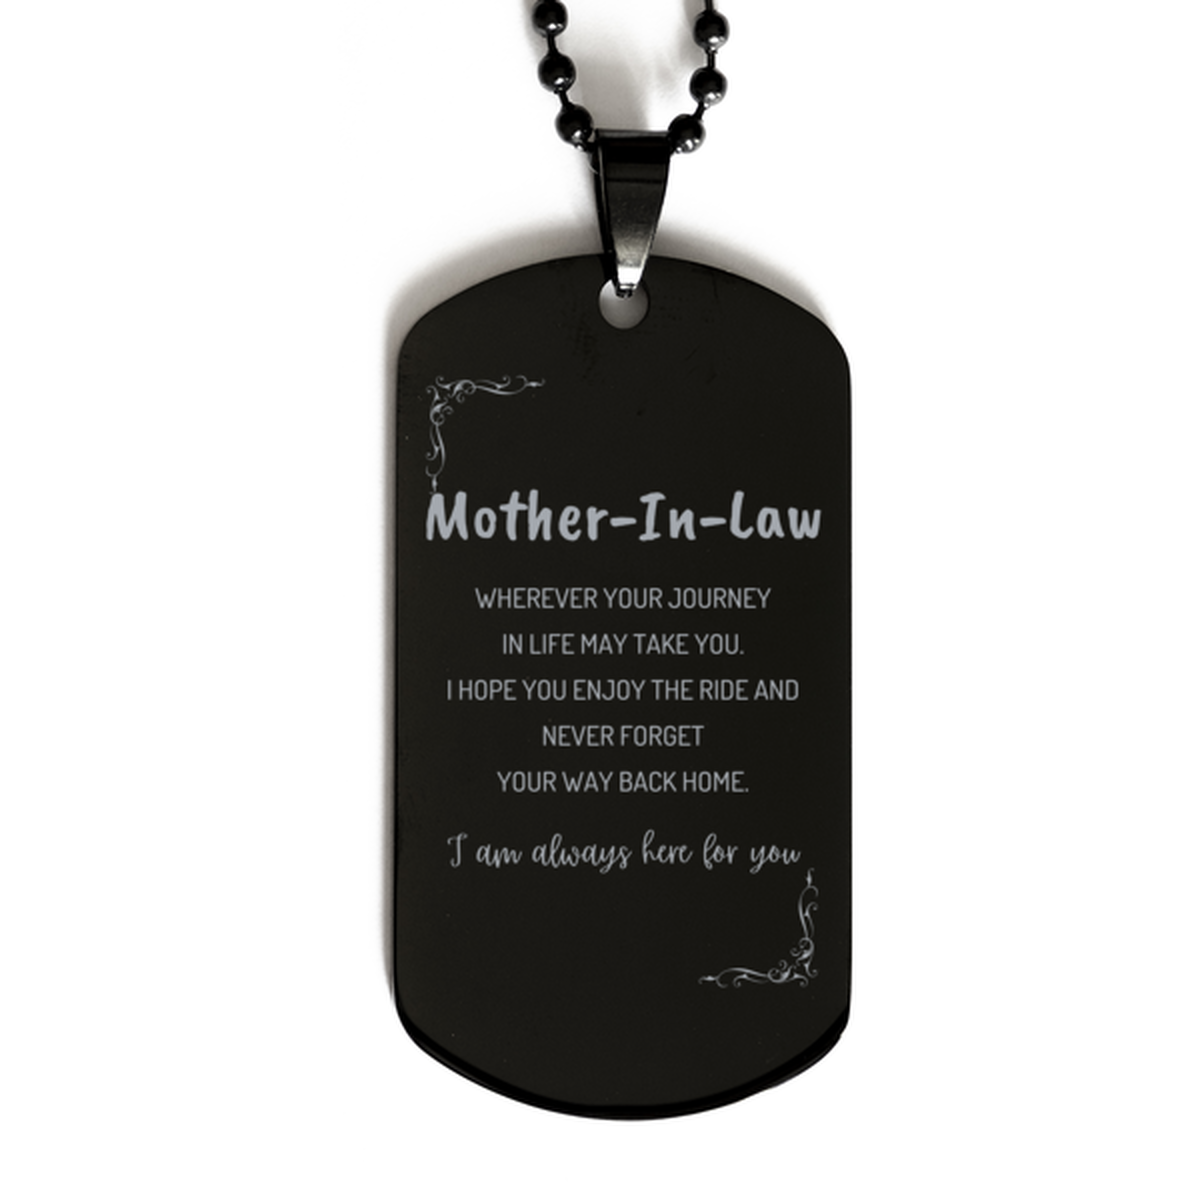 Mother-In-Law wherever your journey in life may take you, I am always here for you Mother-In-Law Black Dog Tag, Awesome Christmas Gifts For Mother-In-Law, Mother-In-Law Birthday Gifts for Men Women Family Loved One